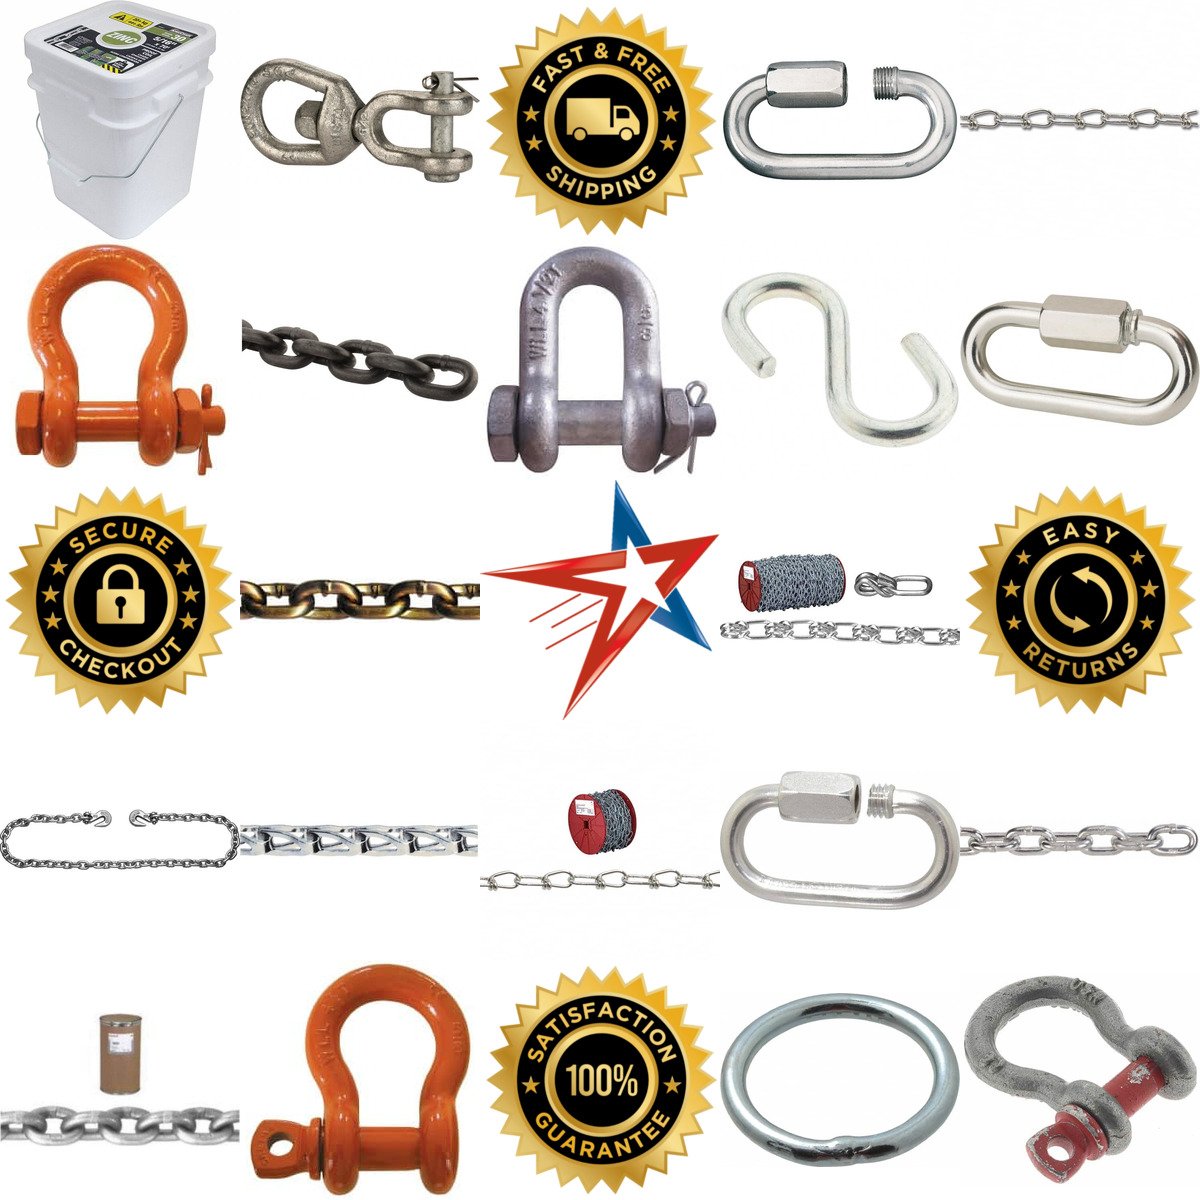 A selection of Chain products on GoVets